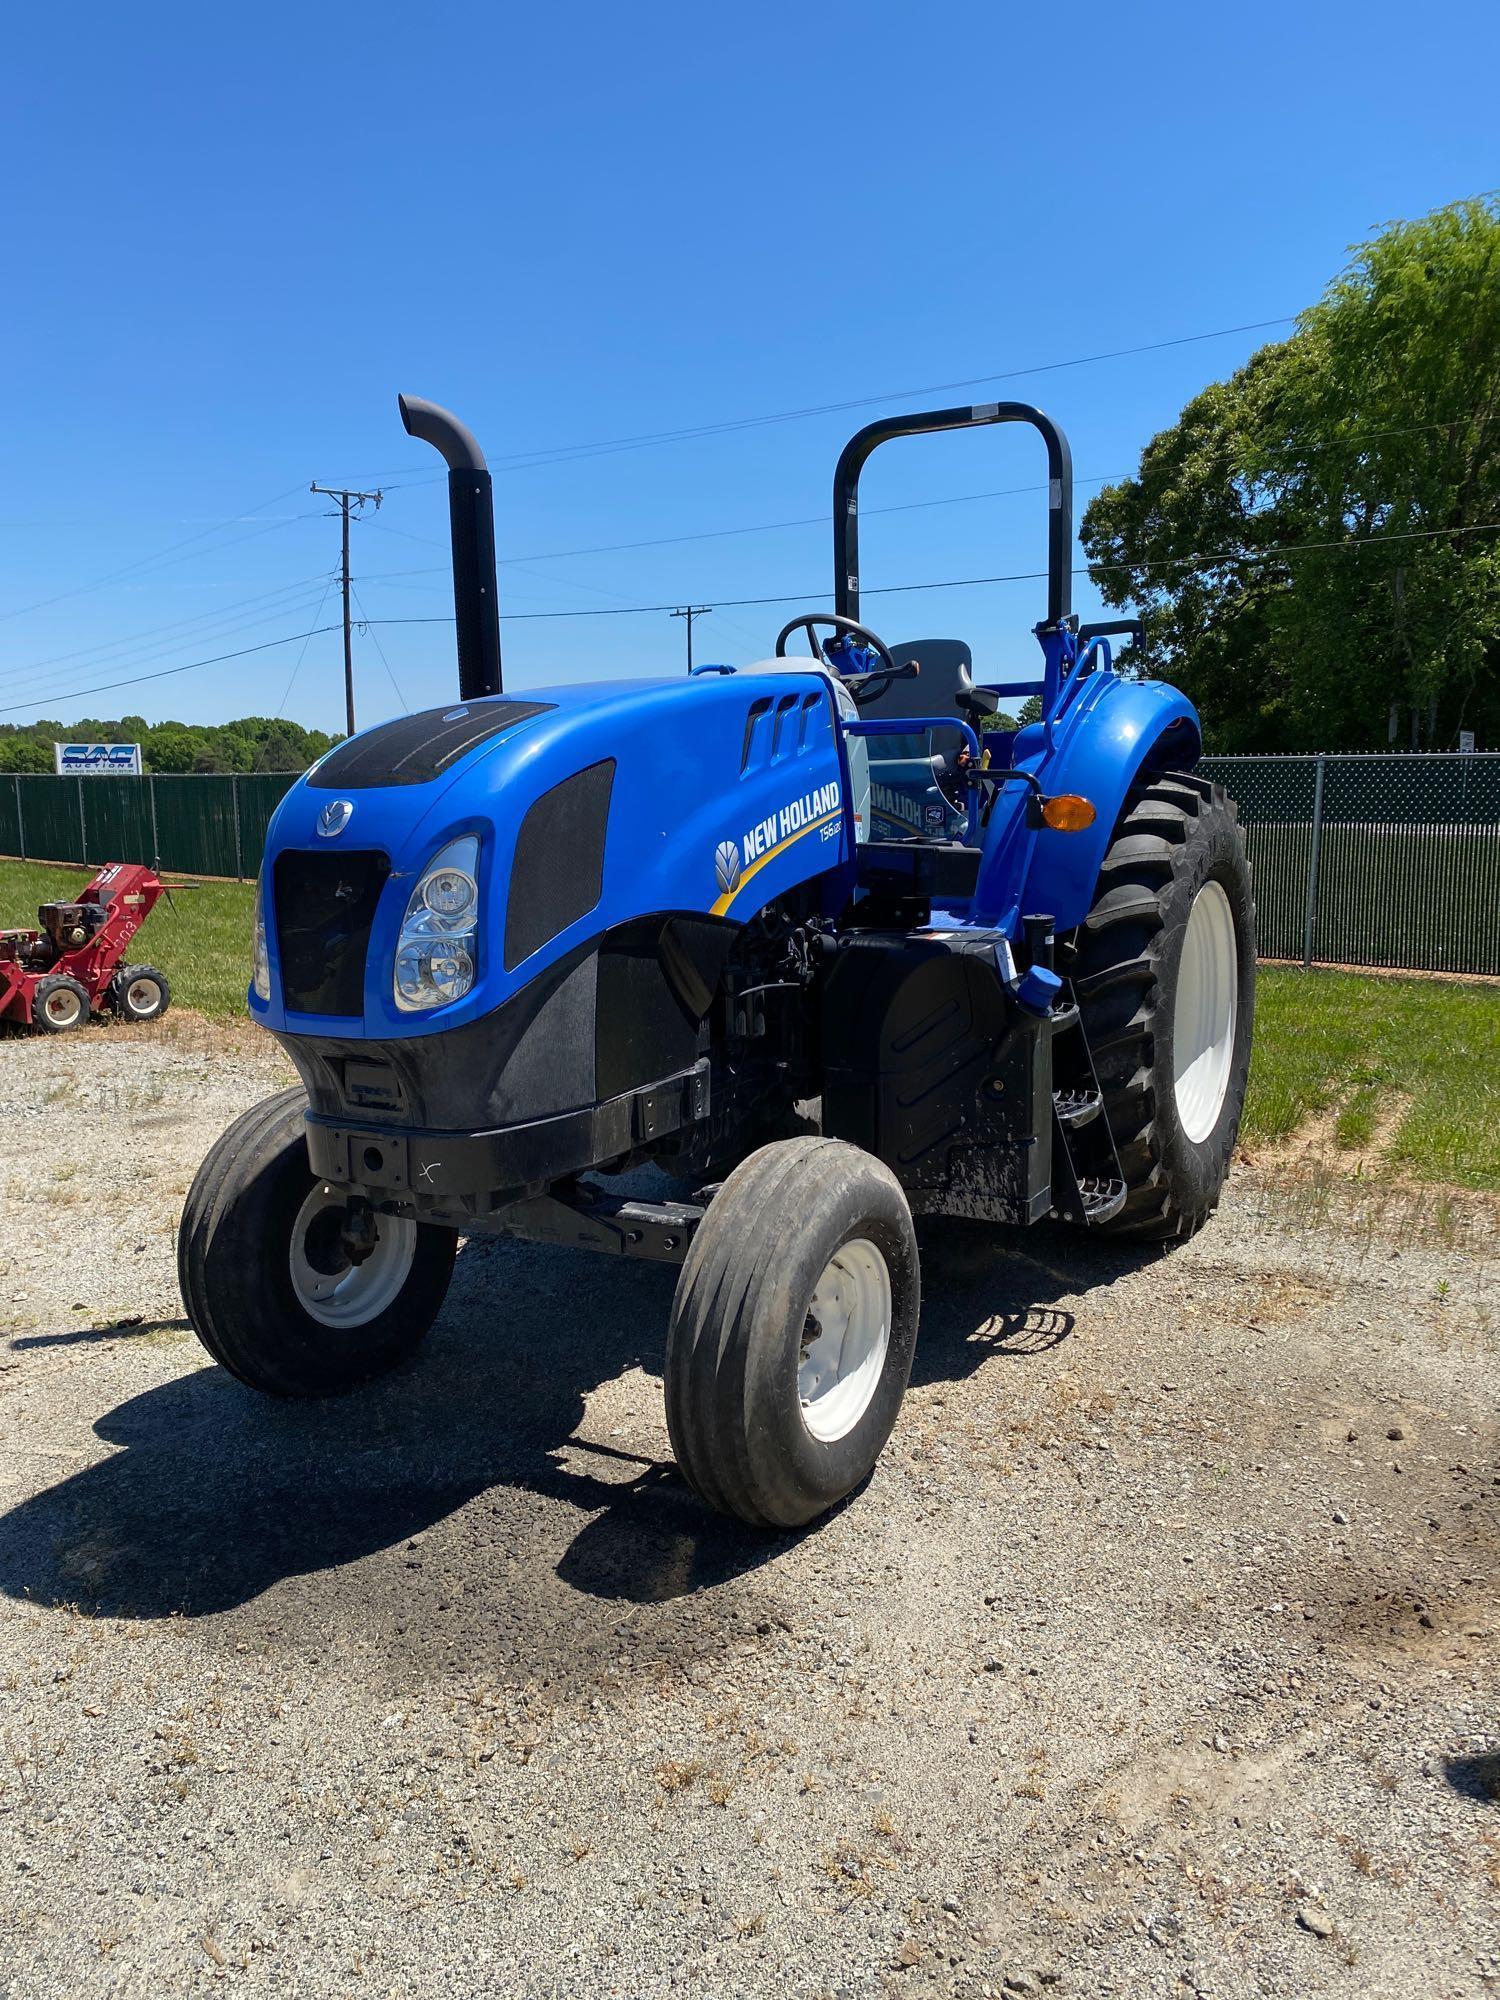 UNUSED 2016 NEW HOLLAND TS6.120 2WD TRACTOR